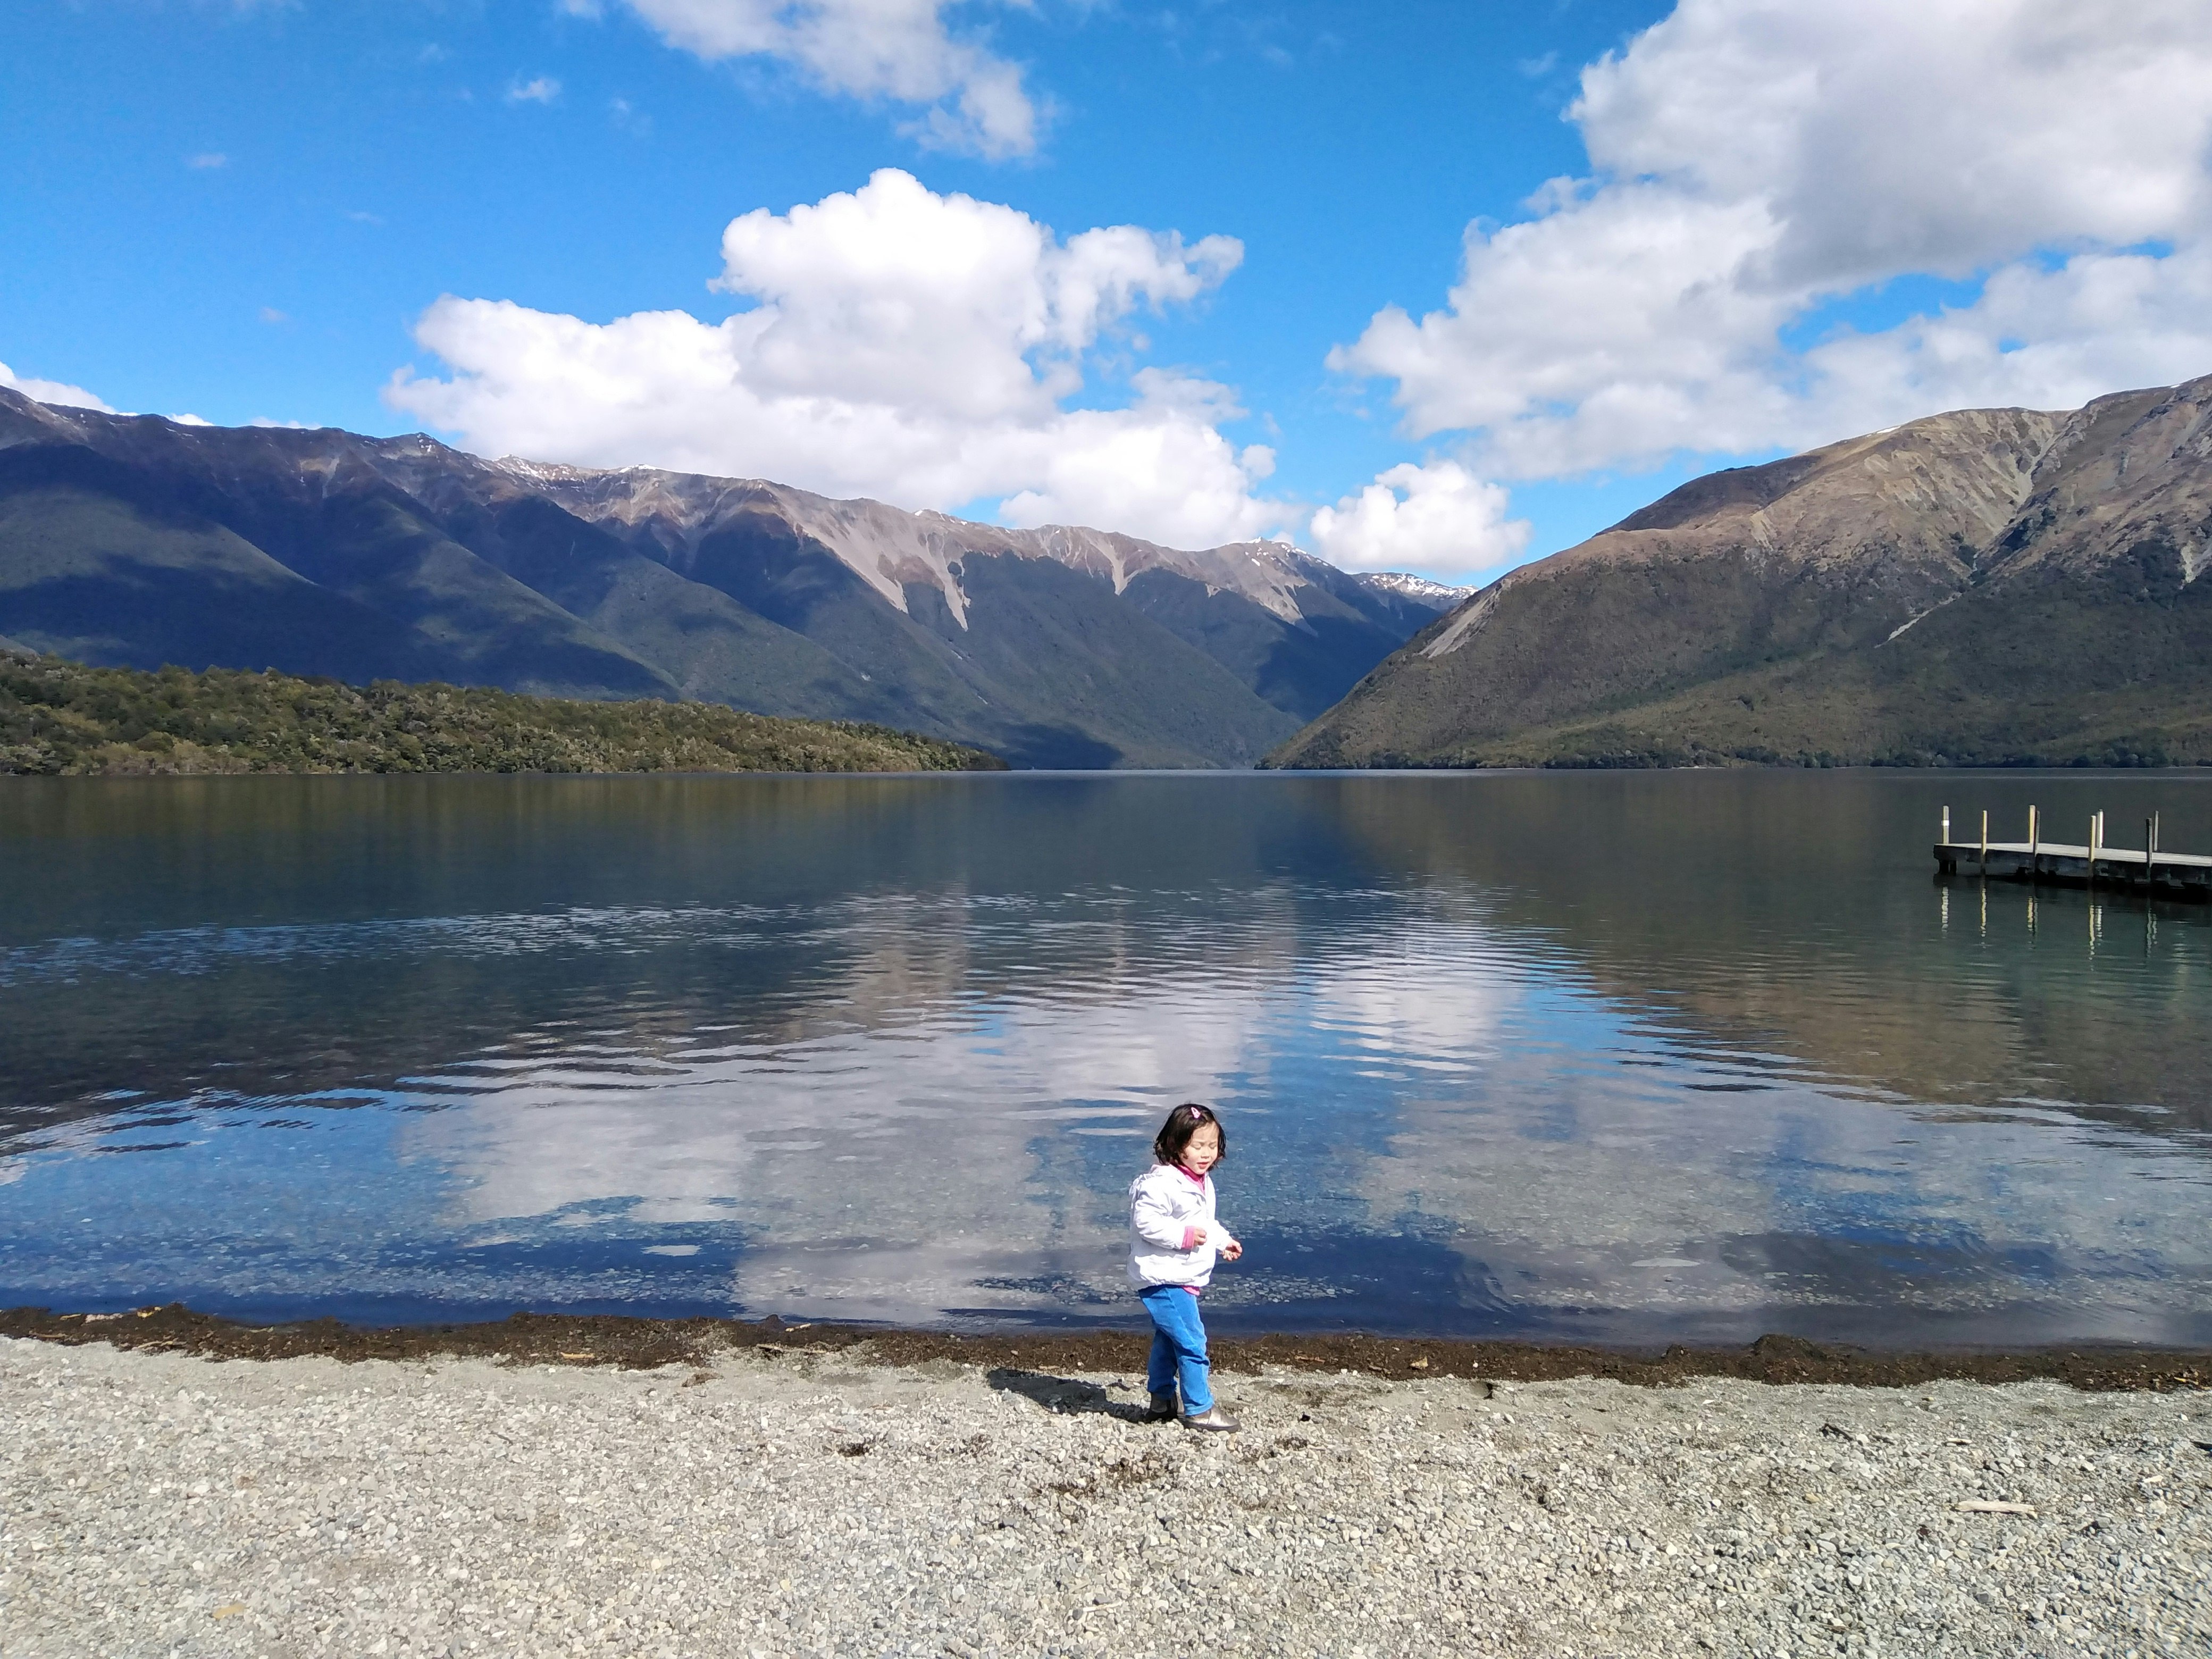 A small child is standing at the bank of Lake Rotoiti, New Zealand. A group of mountains is visible in the background, as is a small pier to the right of the shot.